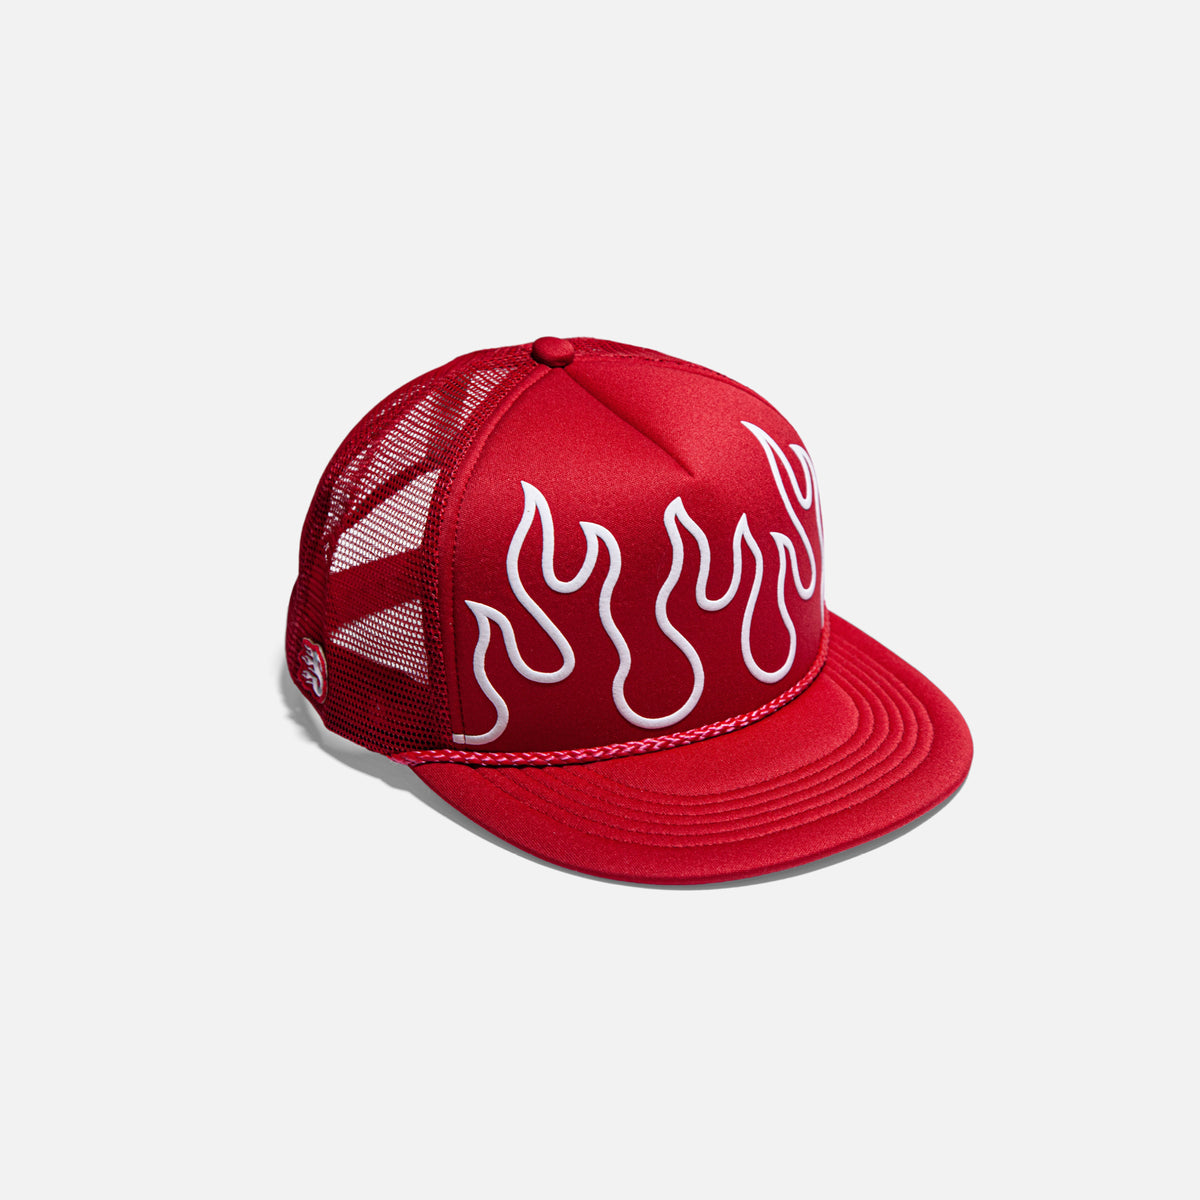 FUEGO CAP - RED / FRONT VIEW